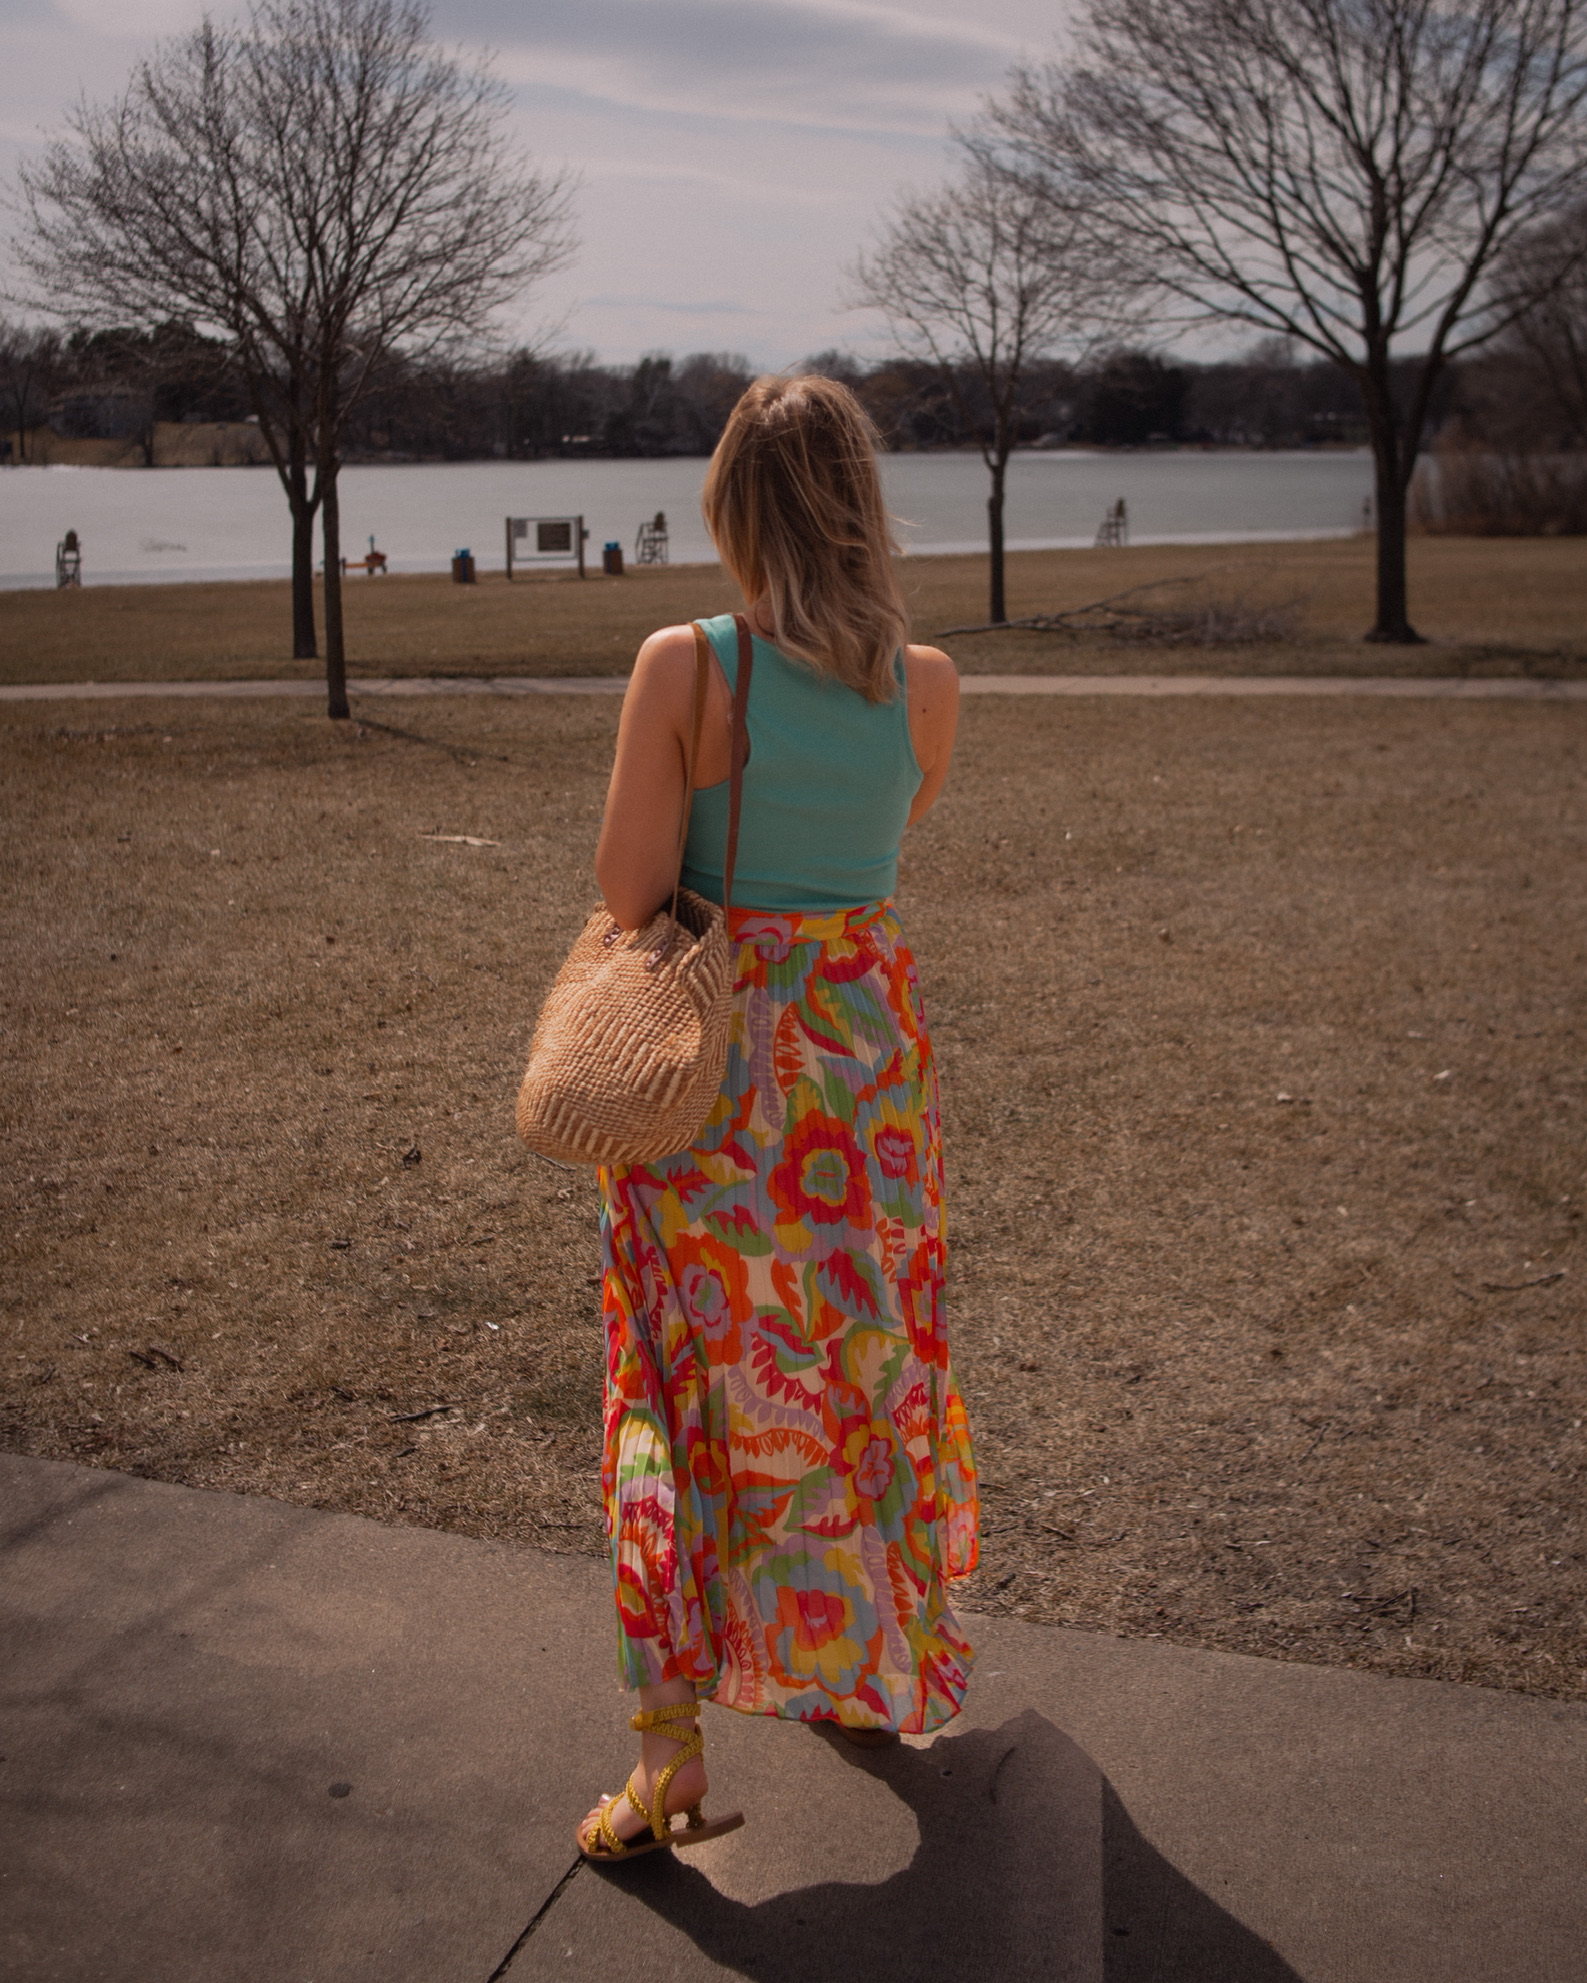 Karin Emily wears a turquoise tank top, floral skirt and yellow wrap sandals